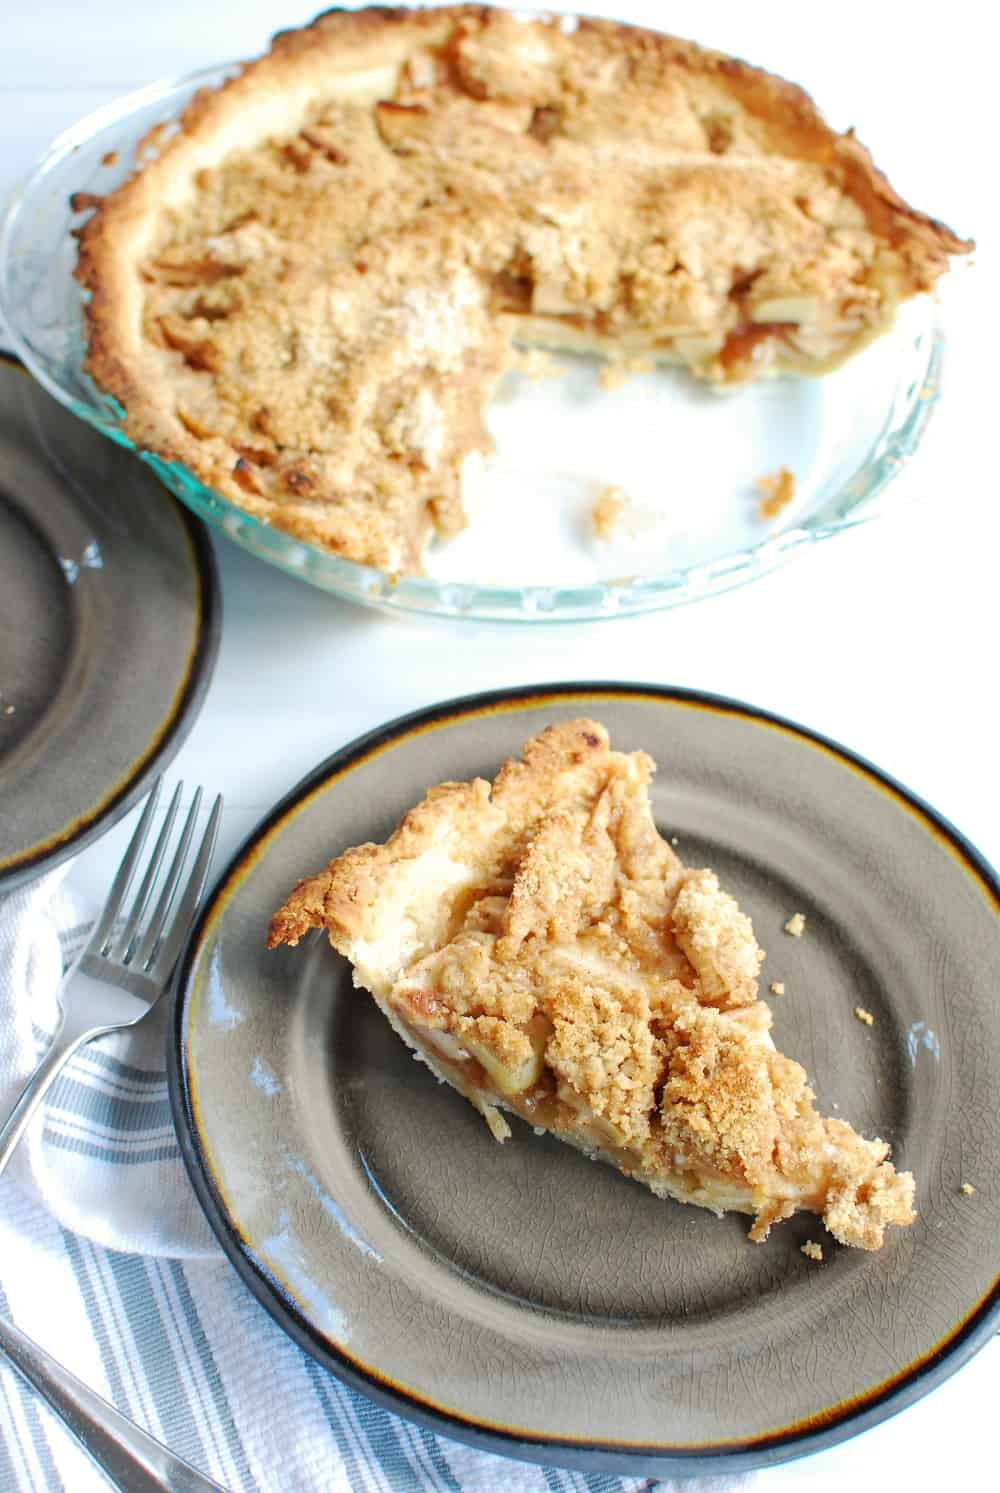 A dairy free apple pie slice on a plate